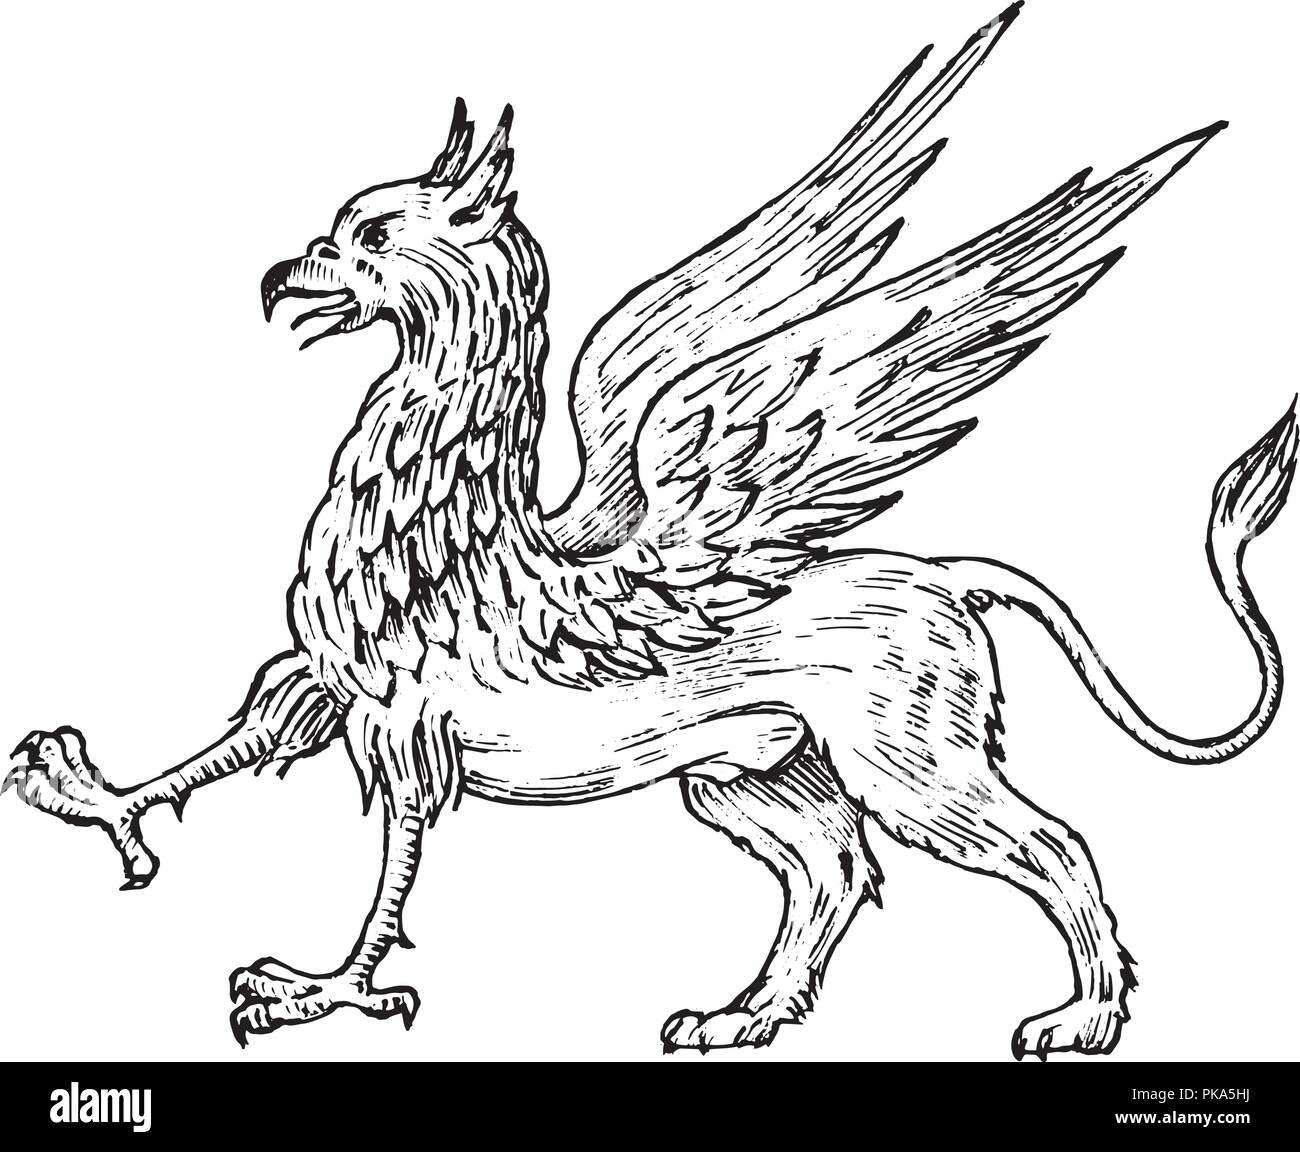 Mythological animals. Mythical antique Griffin. Ancient Birds, fantastic creatures in the old vintage style. Engraved hand drawn old sketch. Stock Vector